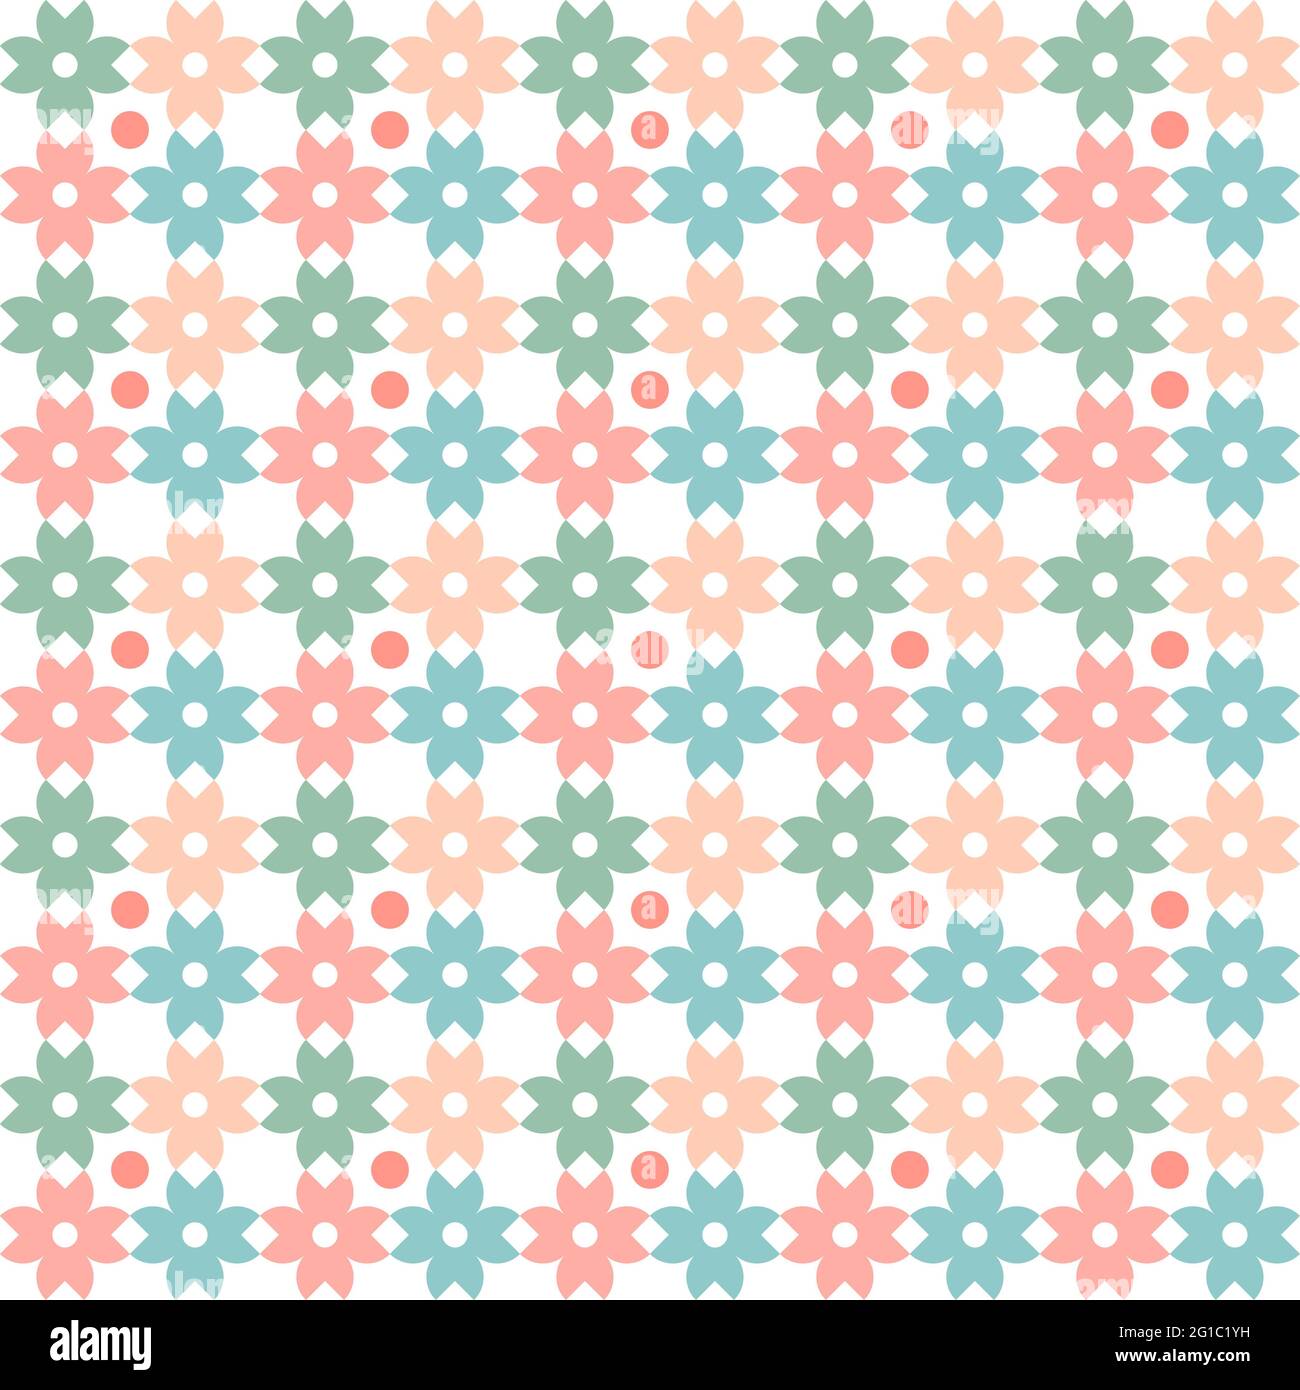 flower abstract pastel seamless background, Endless texture can be used for wallpaper, pattern fills, tilling, surface textures, gifts wrapping, fabri Stock Photo